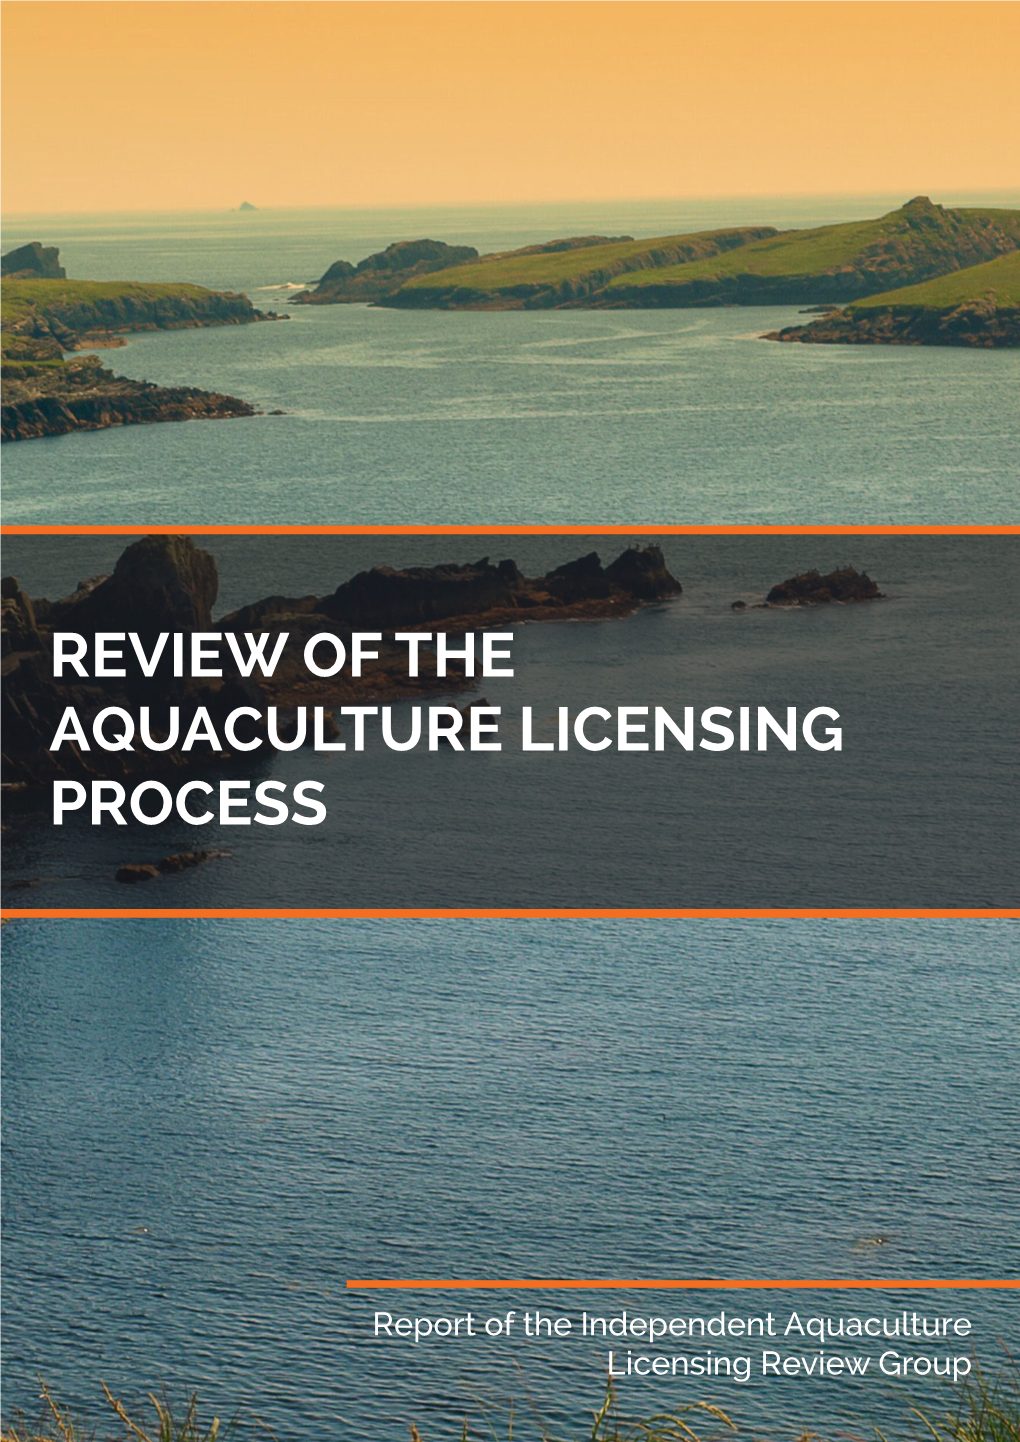 Review of the Aquaculture Licensing Process